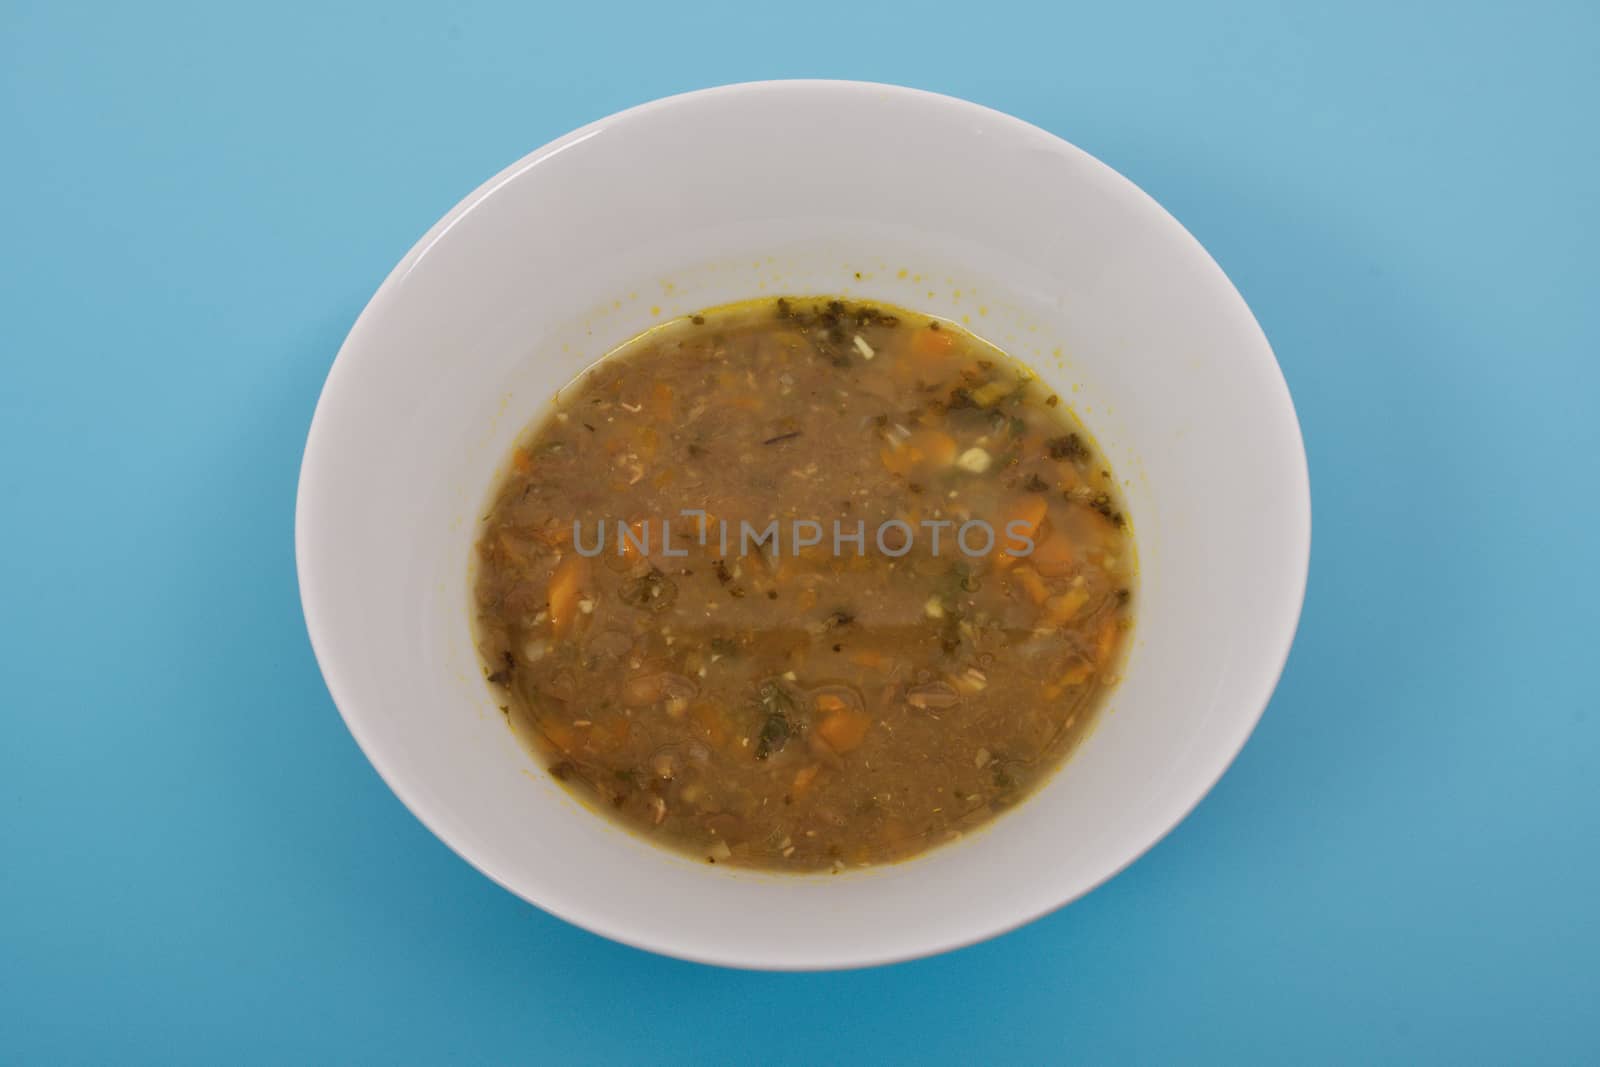 Lentil soup with carrot on a blue background